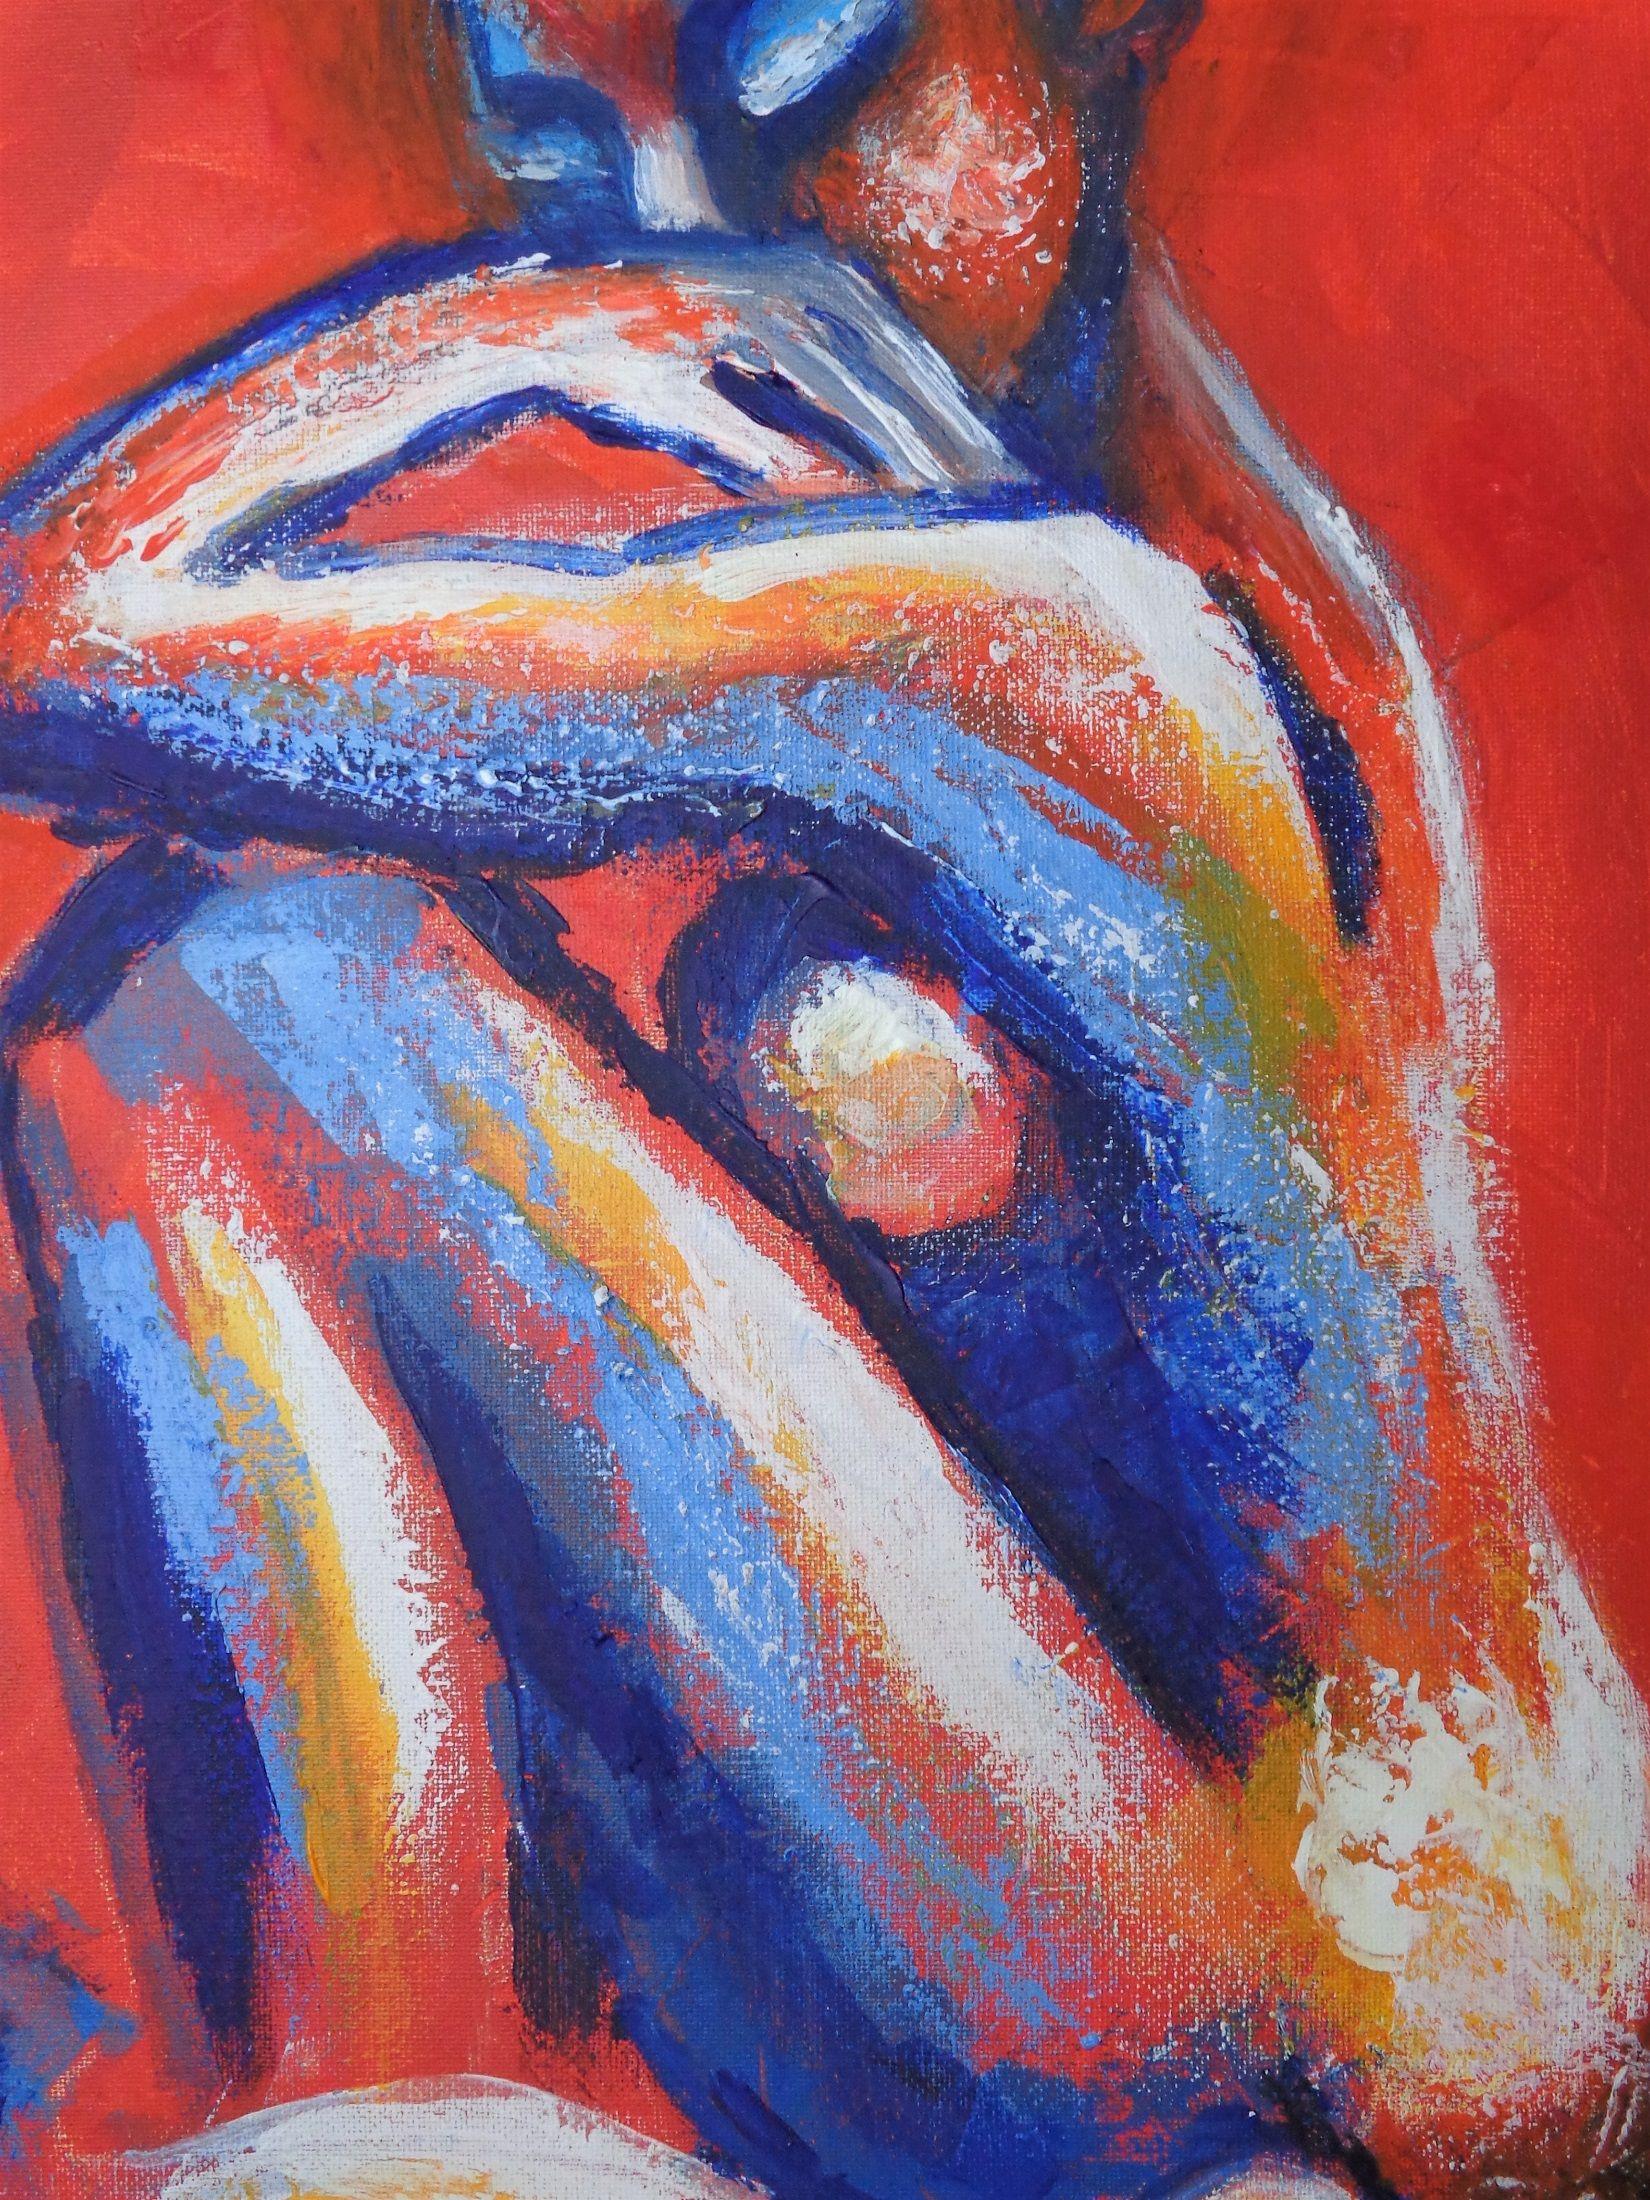 Original contemporary figurative acrylics painting on canvas, painted edges and ready to hang. Part of a new series of 3 nude figures, view of front, profile and back, with orange predominant colour. Colourful and textured semi-abstract painting